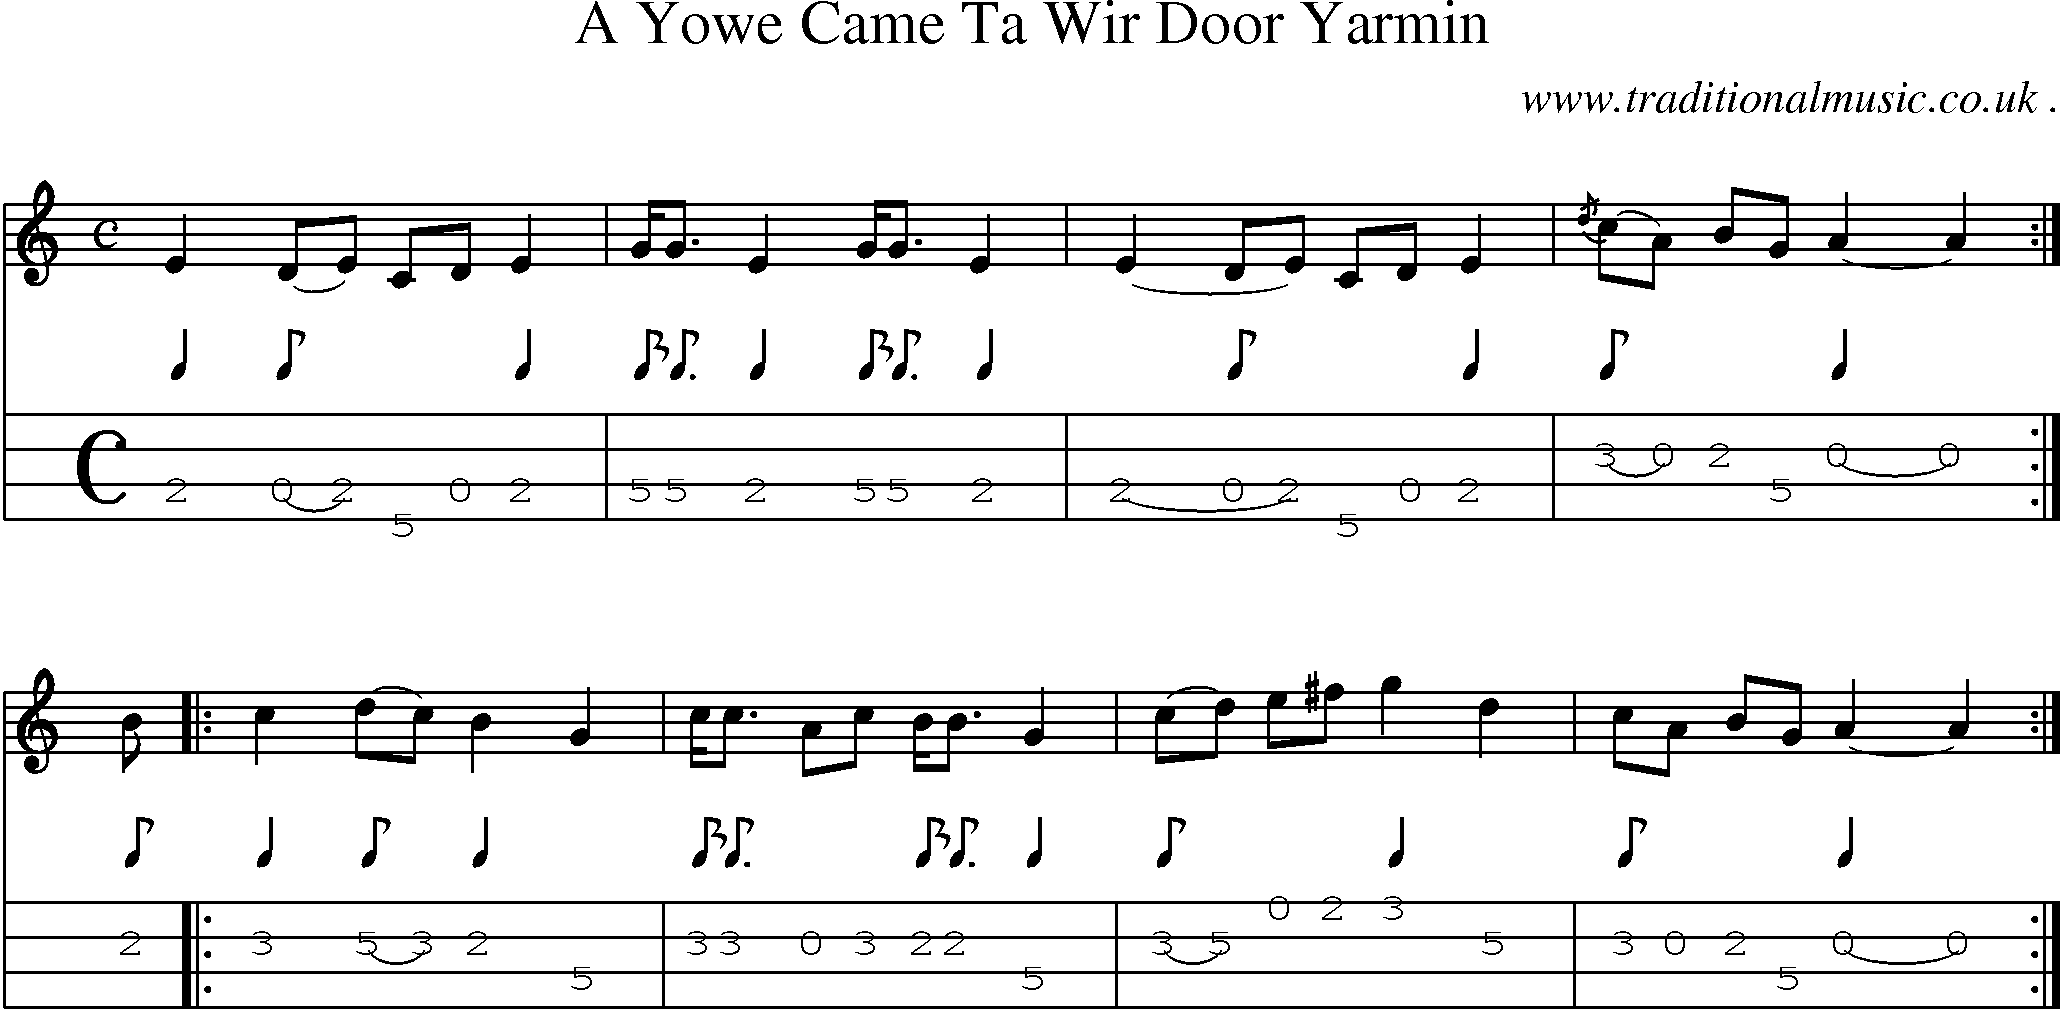 Sheet-music  score, Chords and Mandolin Tabs for A Yowe Came Ta Wir Door Yarmin